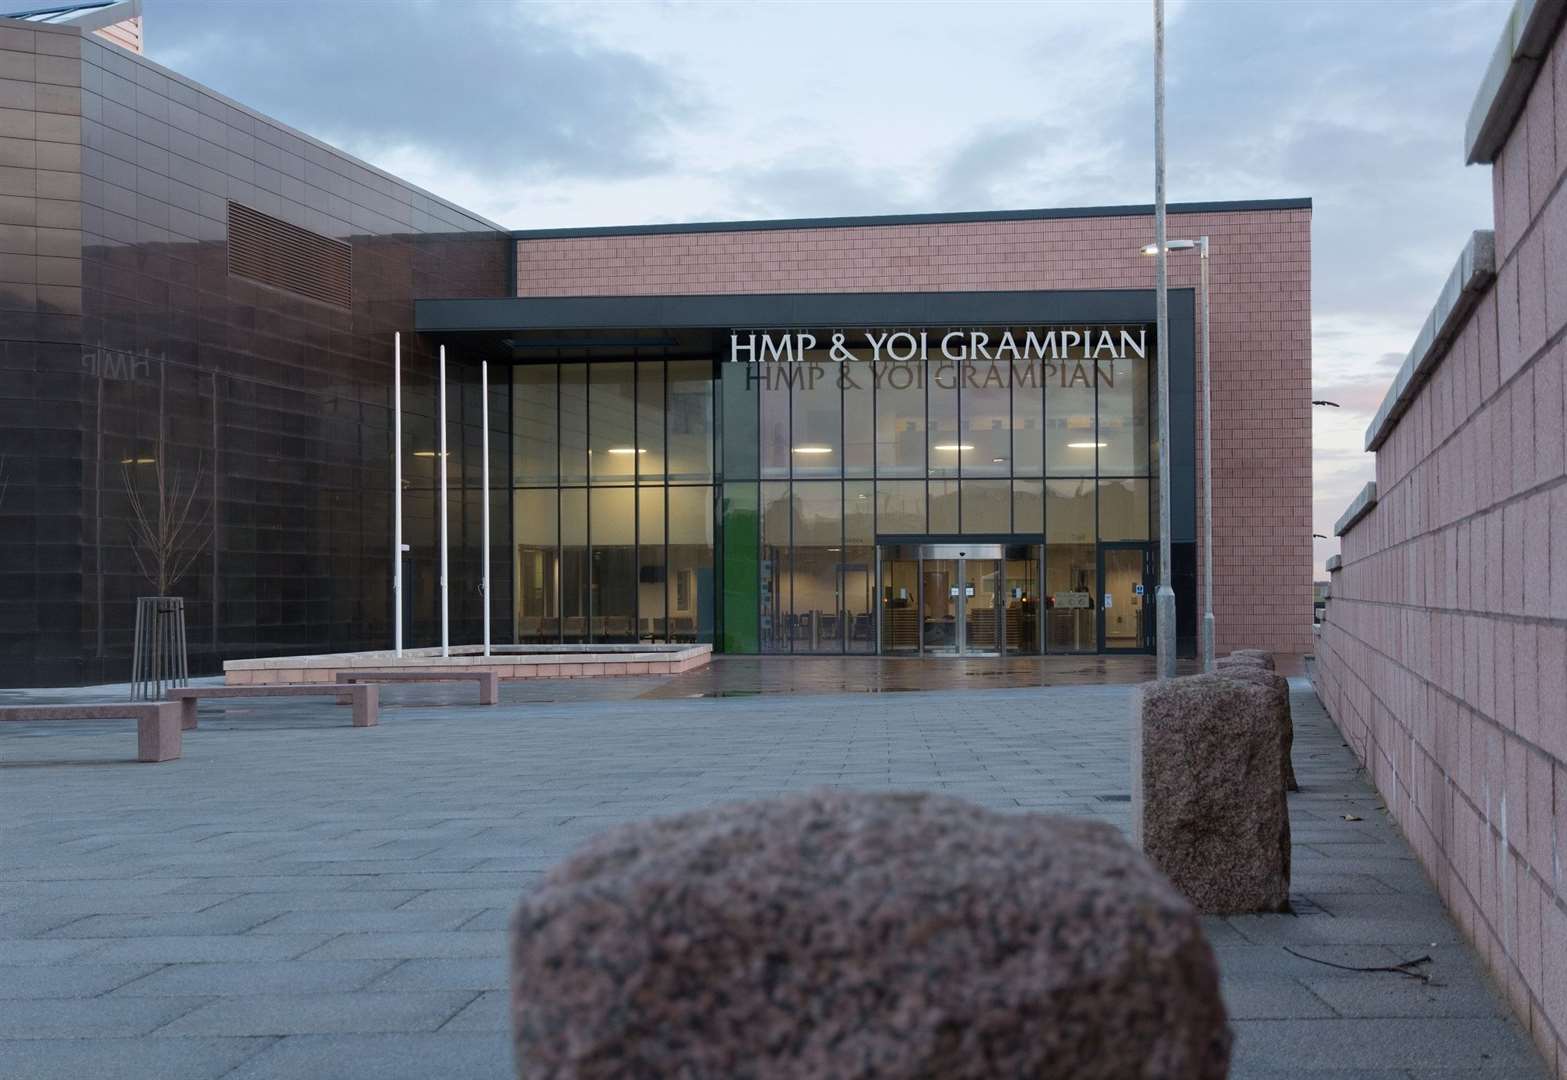 The situation regarding the visitor's centre at HMP Grampian was highlighted by MSP Gillian Martin